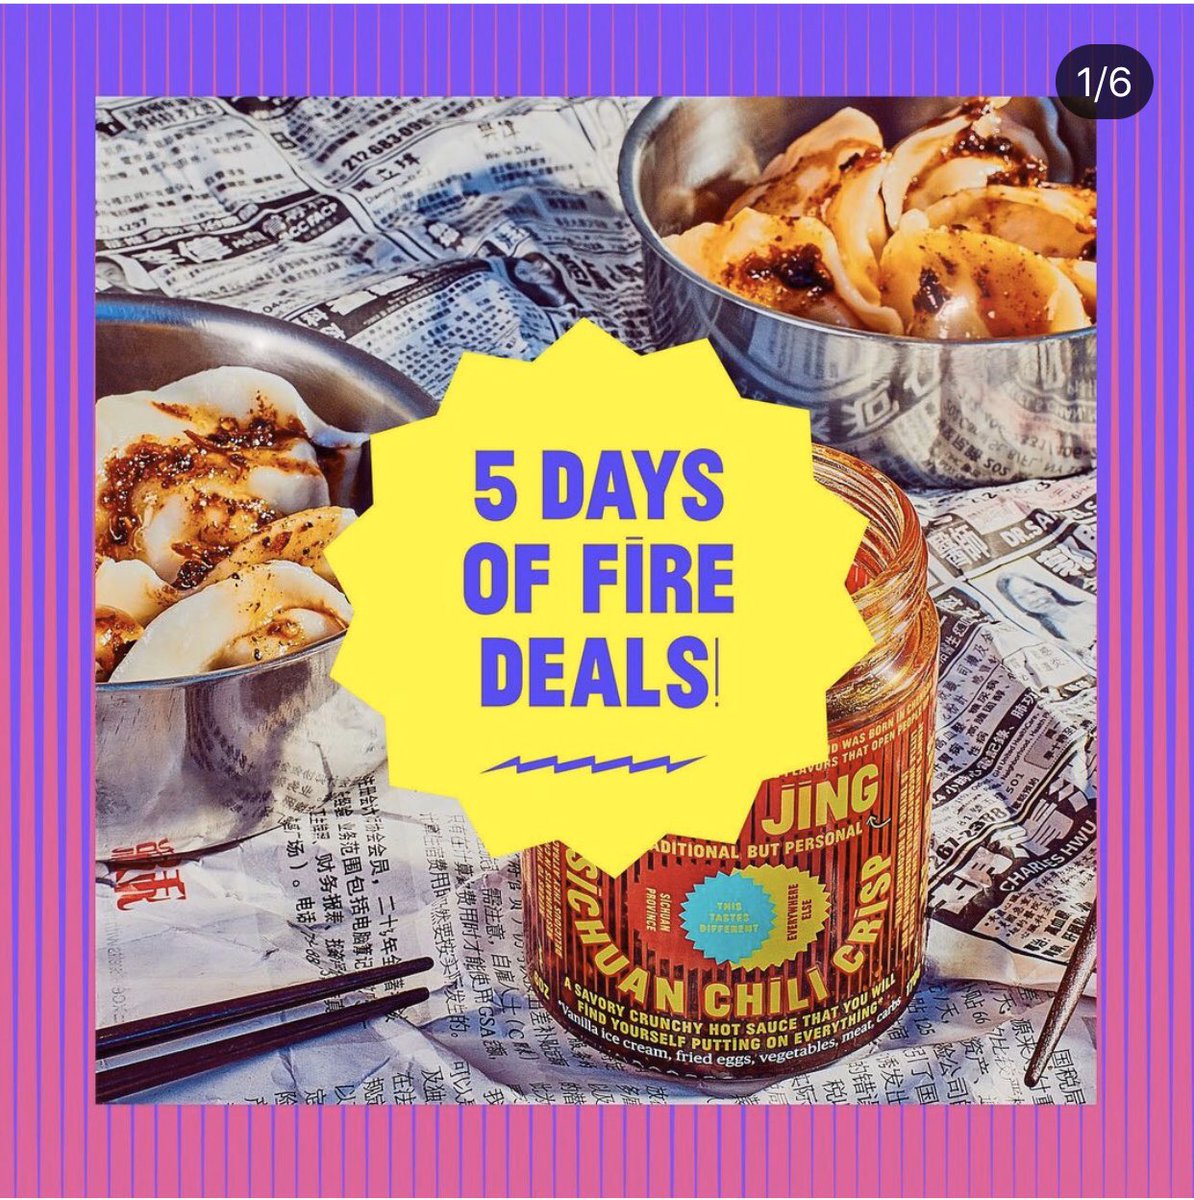  @flybyjing made it fun and entertaining with 5 days of fire deals on their signatures condiments, gift sets, and even suits made for sweating. And if you are getting anything from them, make sure to try the Sichuan Chili Crisp. It's hot, bold, spicy!